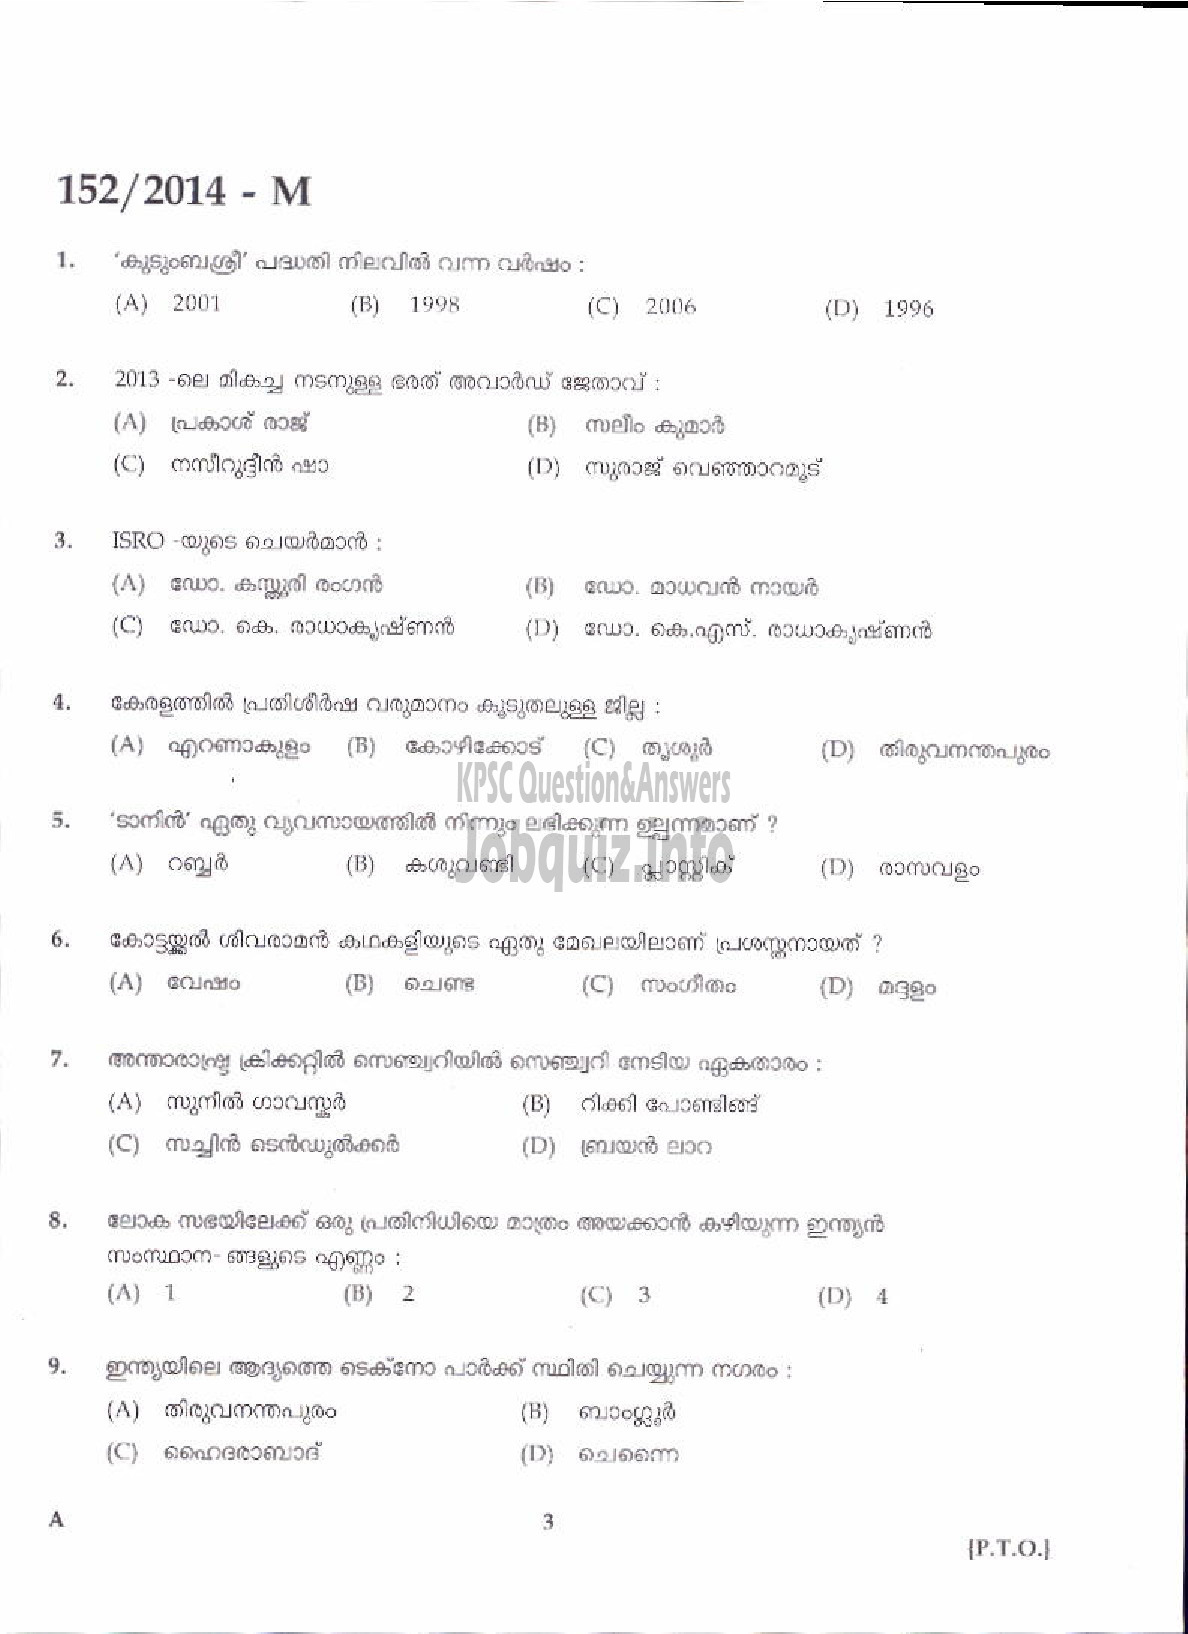 Kerala PSC Question Paper - LGS VARIOUS TVPM AND WYD ( Malayalam ) -1